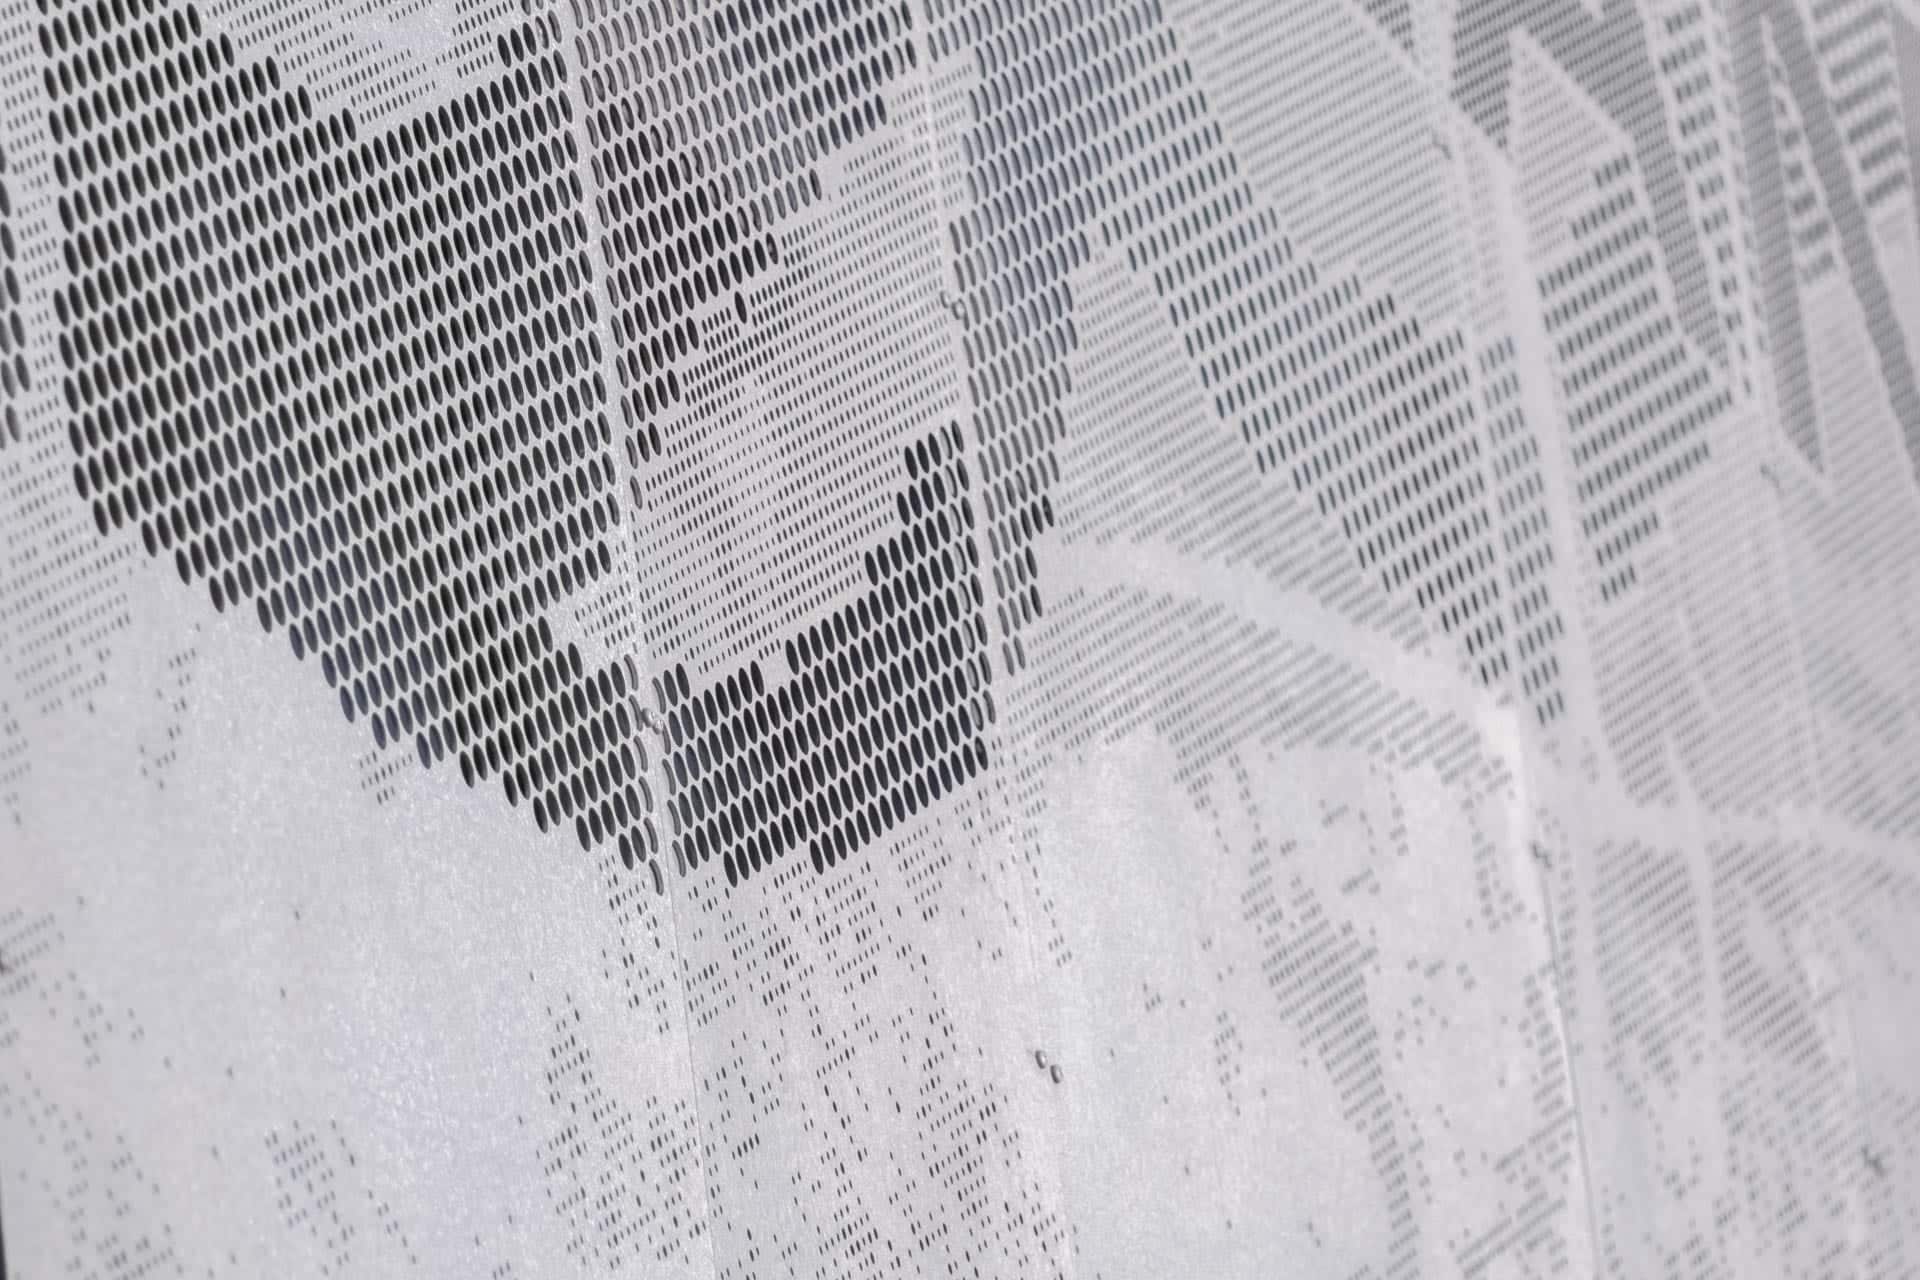 Detail of the ImageWall Perforated Metal Signage used for Highland Park in Minnesota.